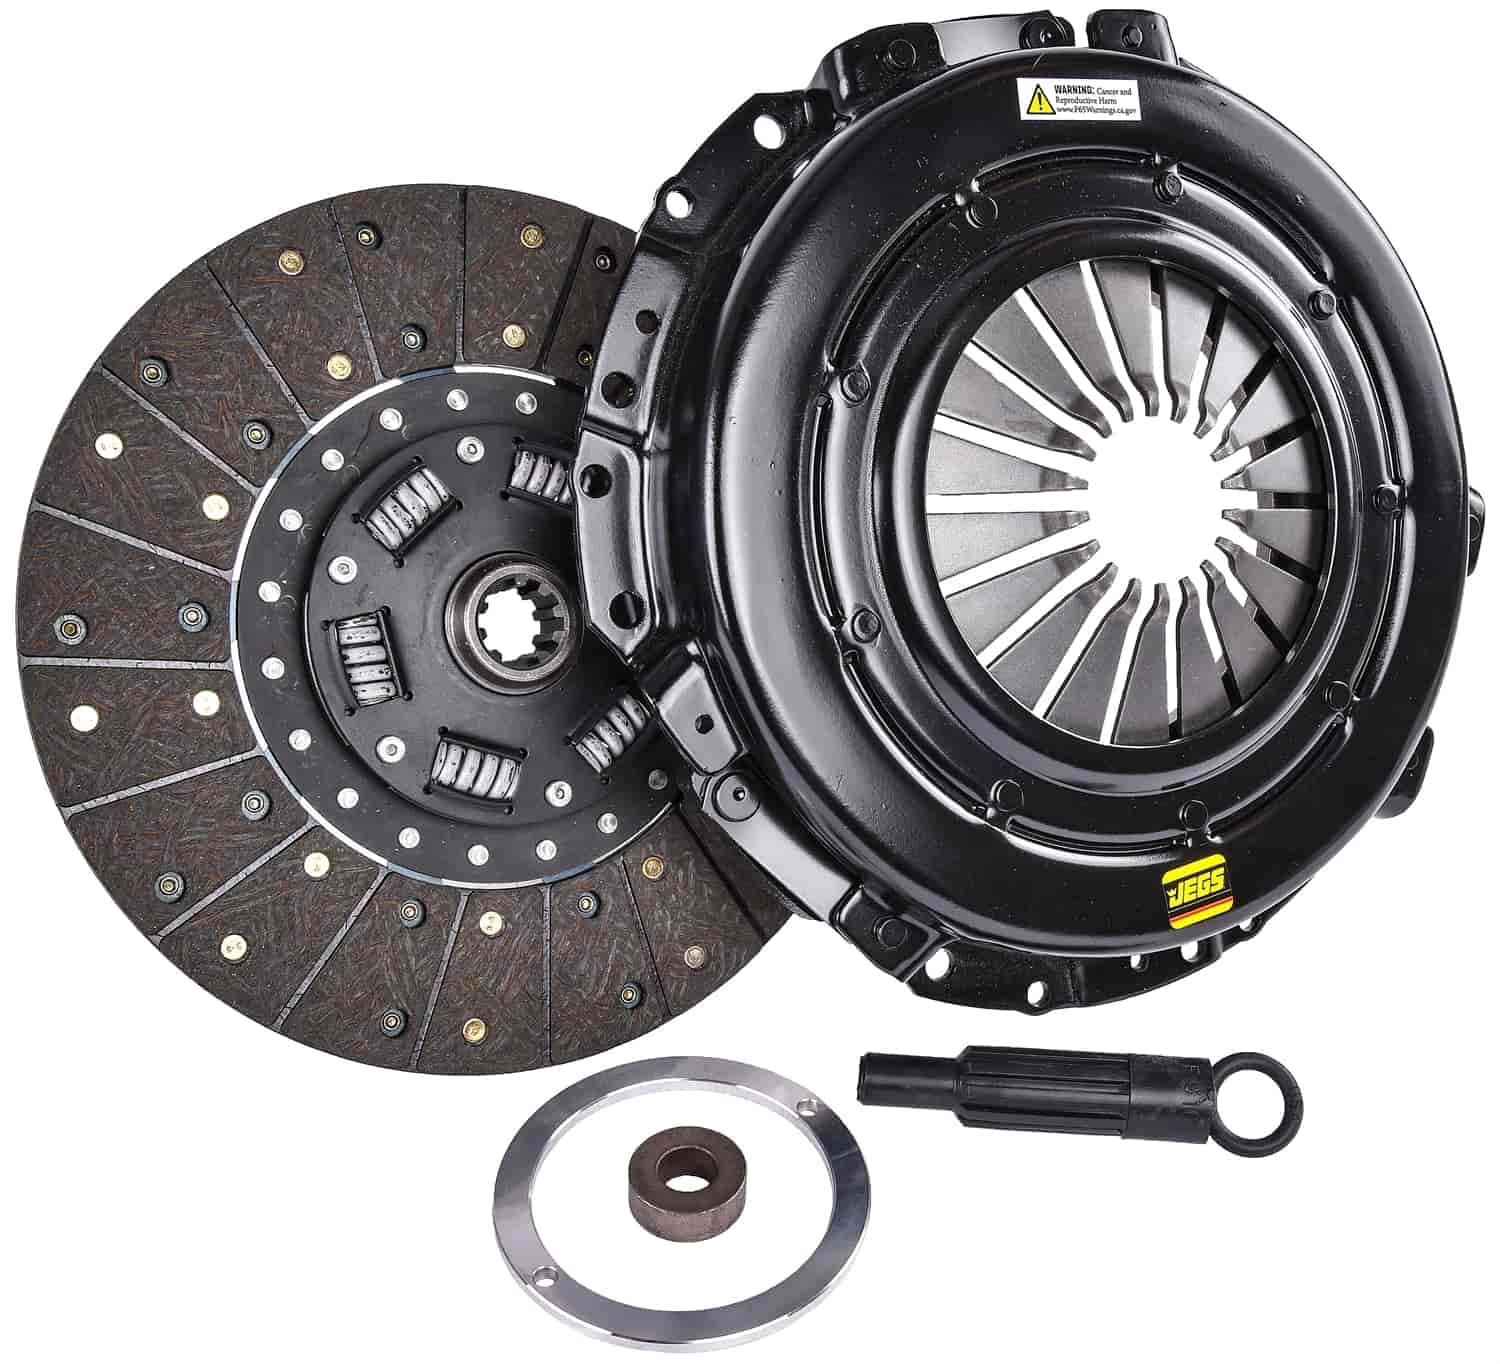 Street Performance Clutch Kit for 2005-2010 Ford Mustang GT with 4.6L Engine [11 in. diameter, 1 1/16 in. x 10 Spline]